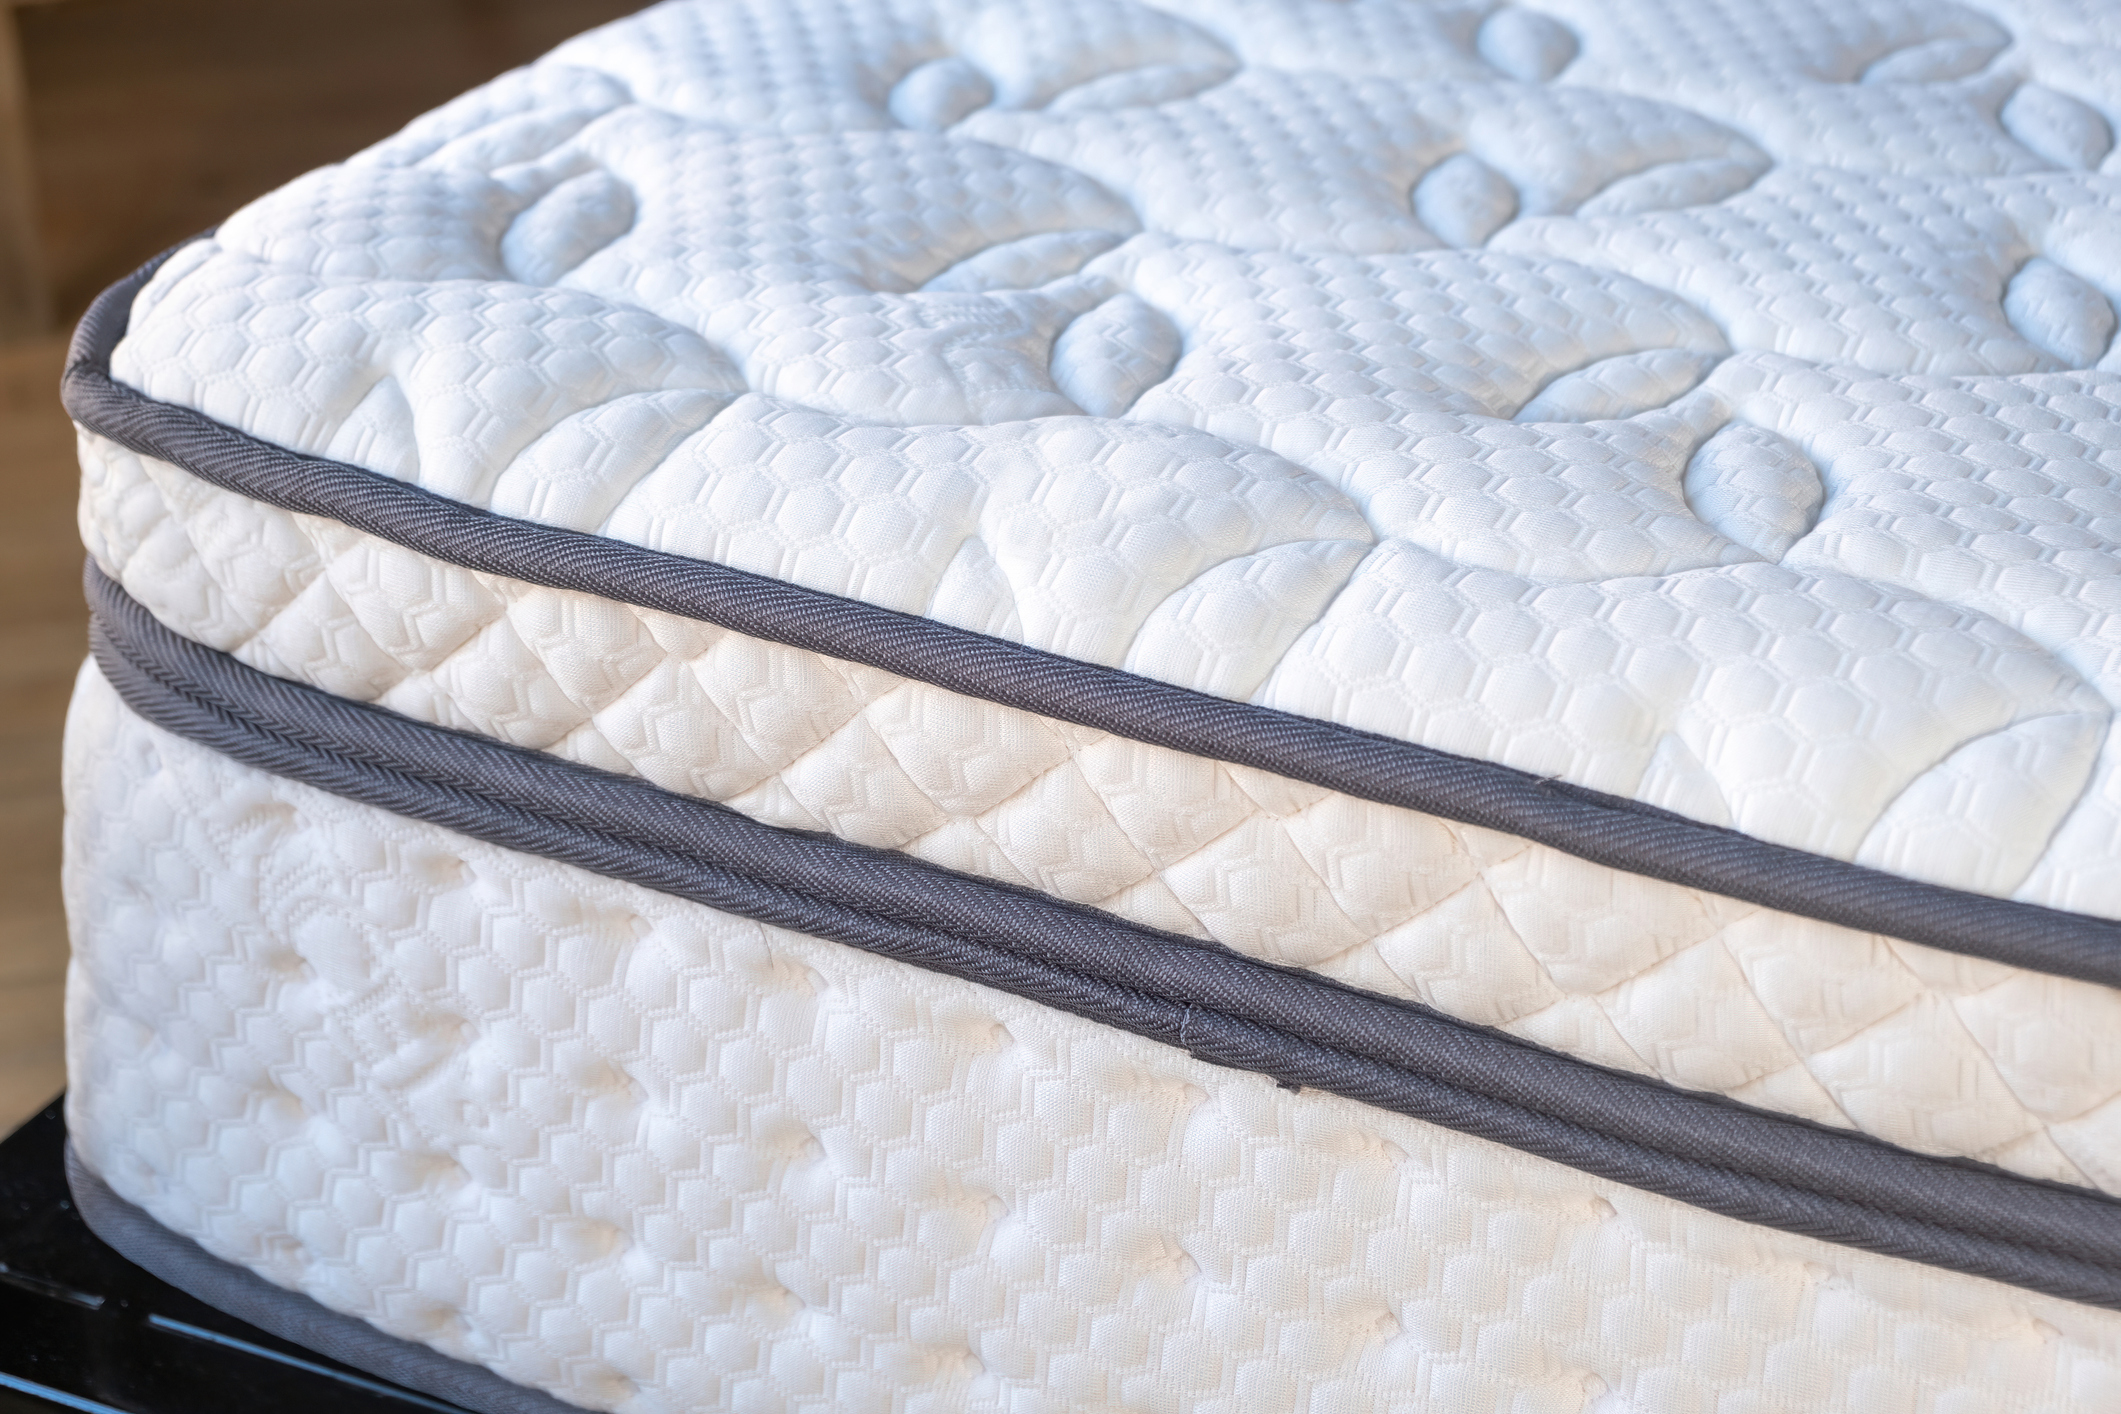 why should you store mattresses flat?